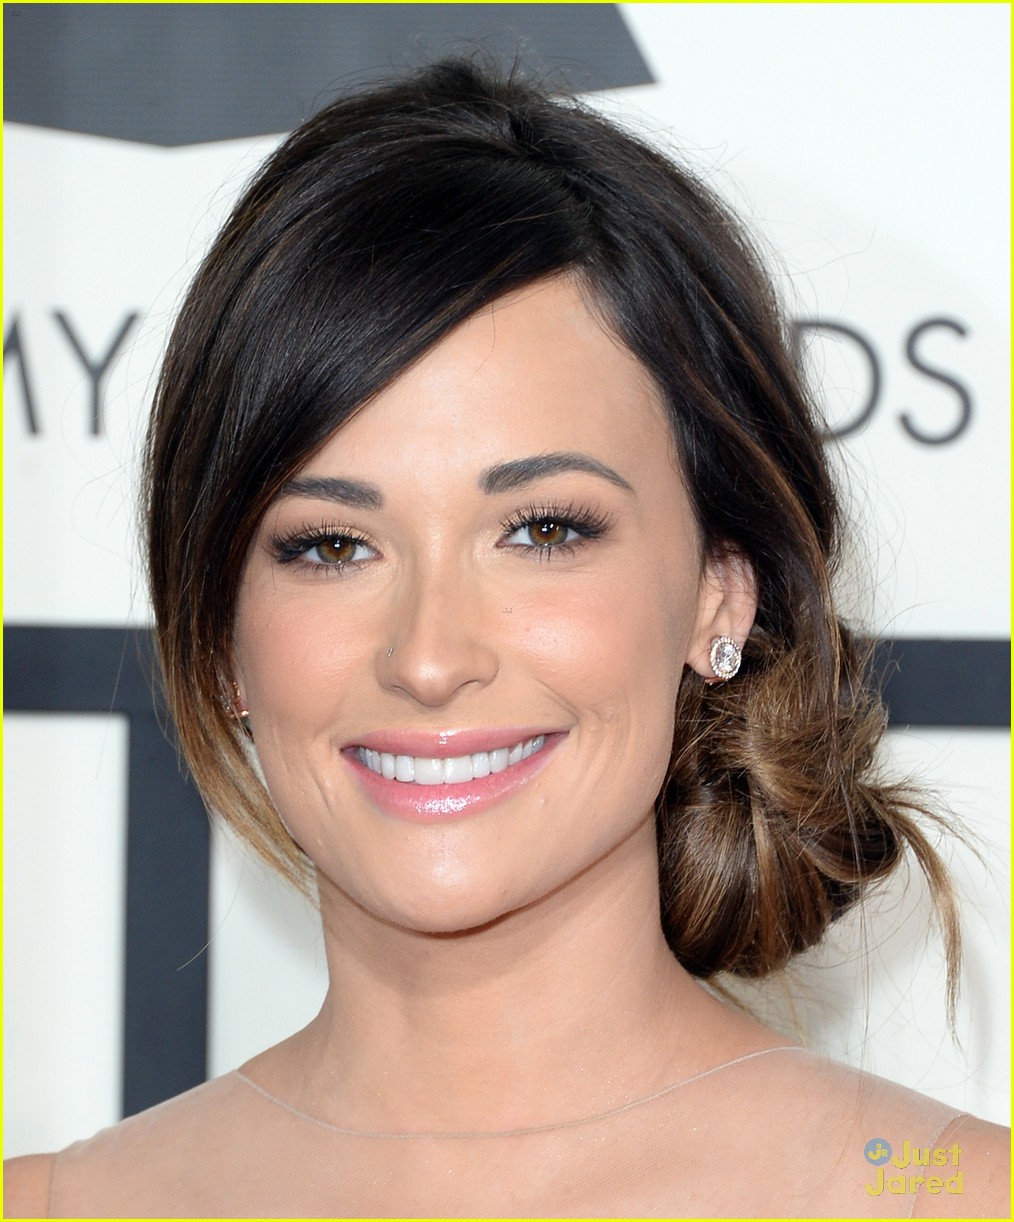 Kacey Musgraves WINS Best Country Album at Grammys 2014 Photo 638914